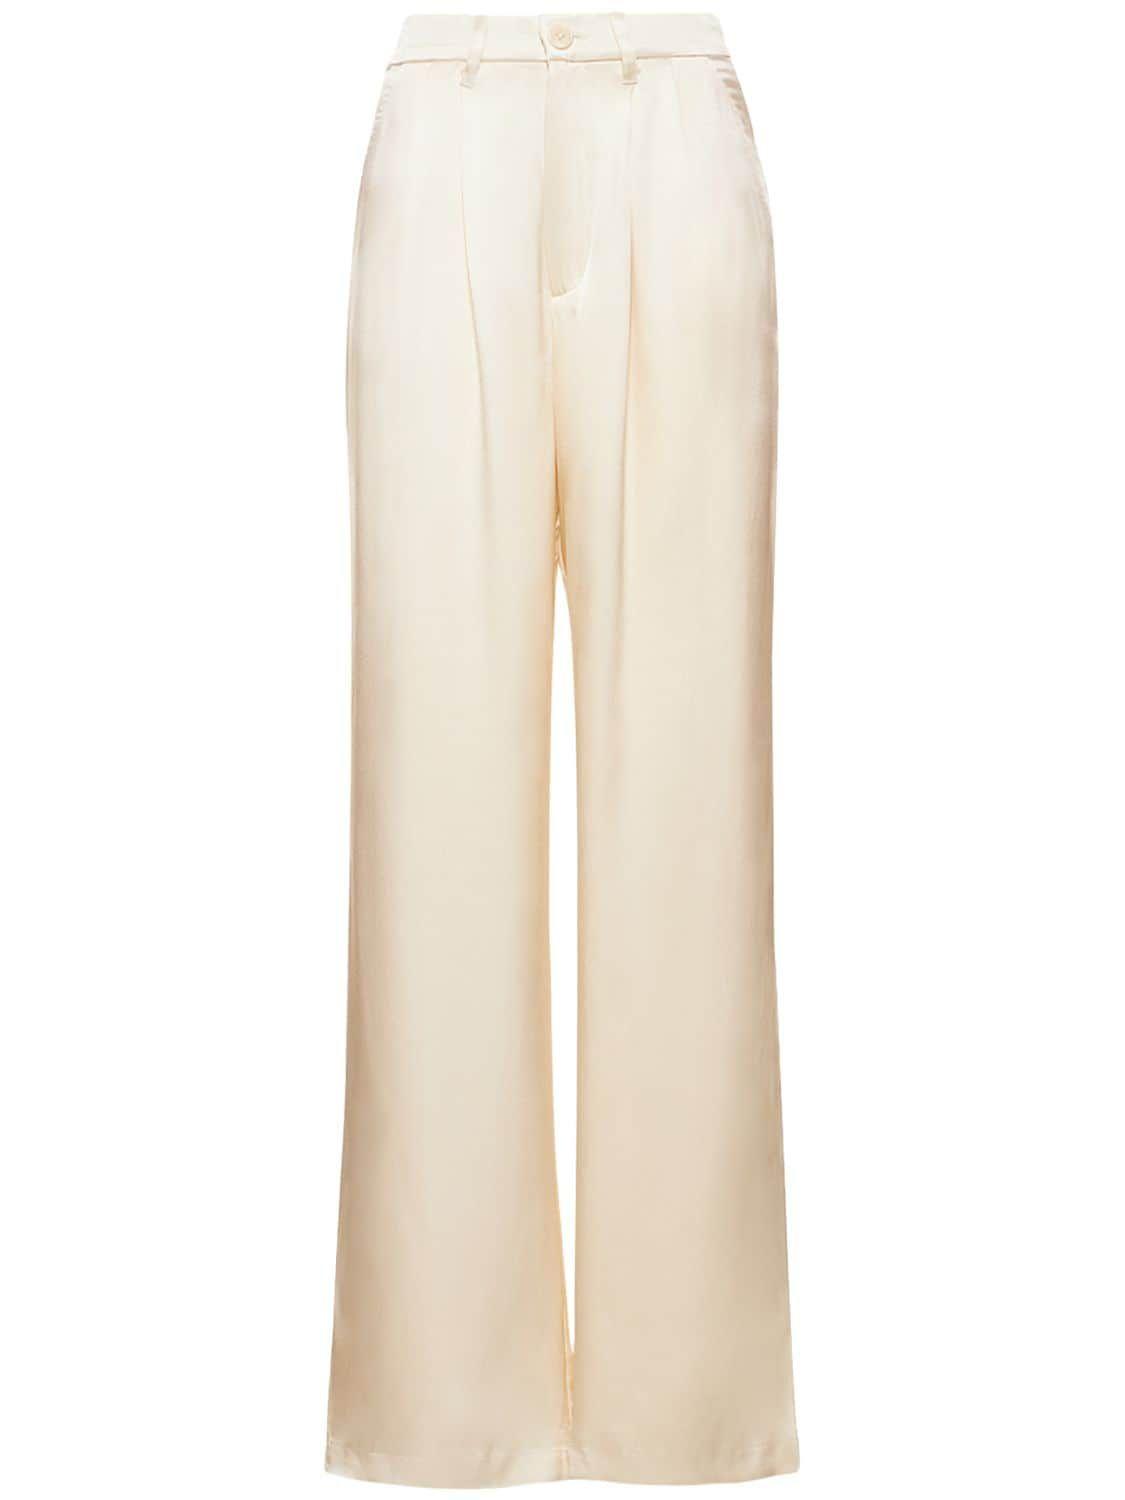 Anine Bing Carrie Silk Satin Straight Pants in Natural | Lyst